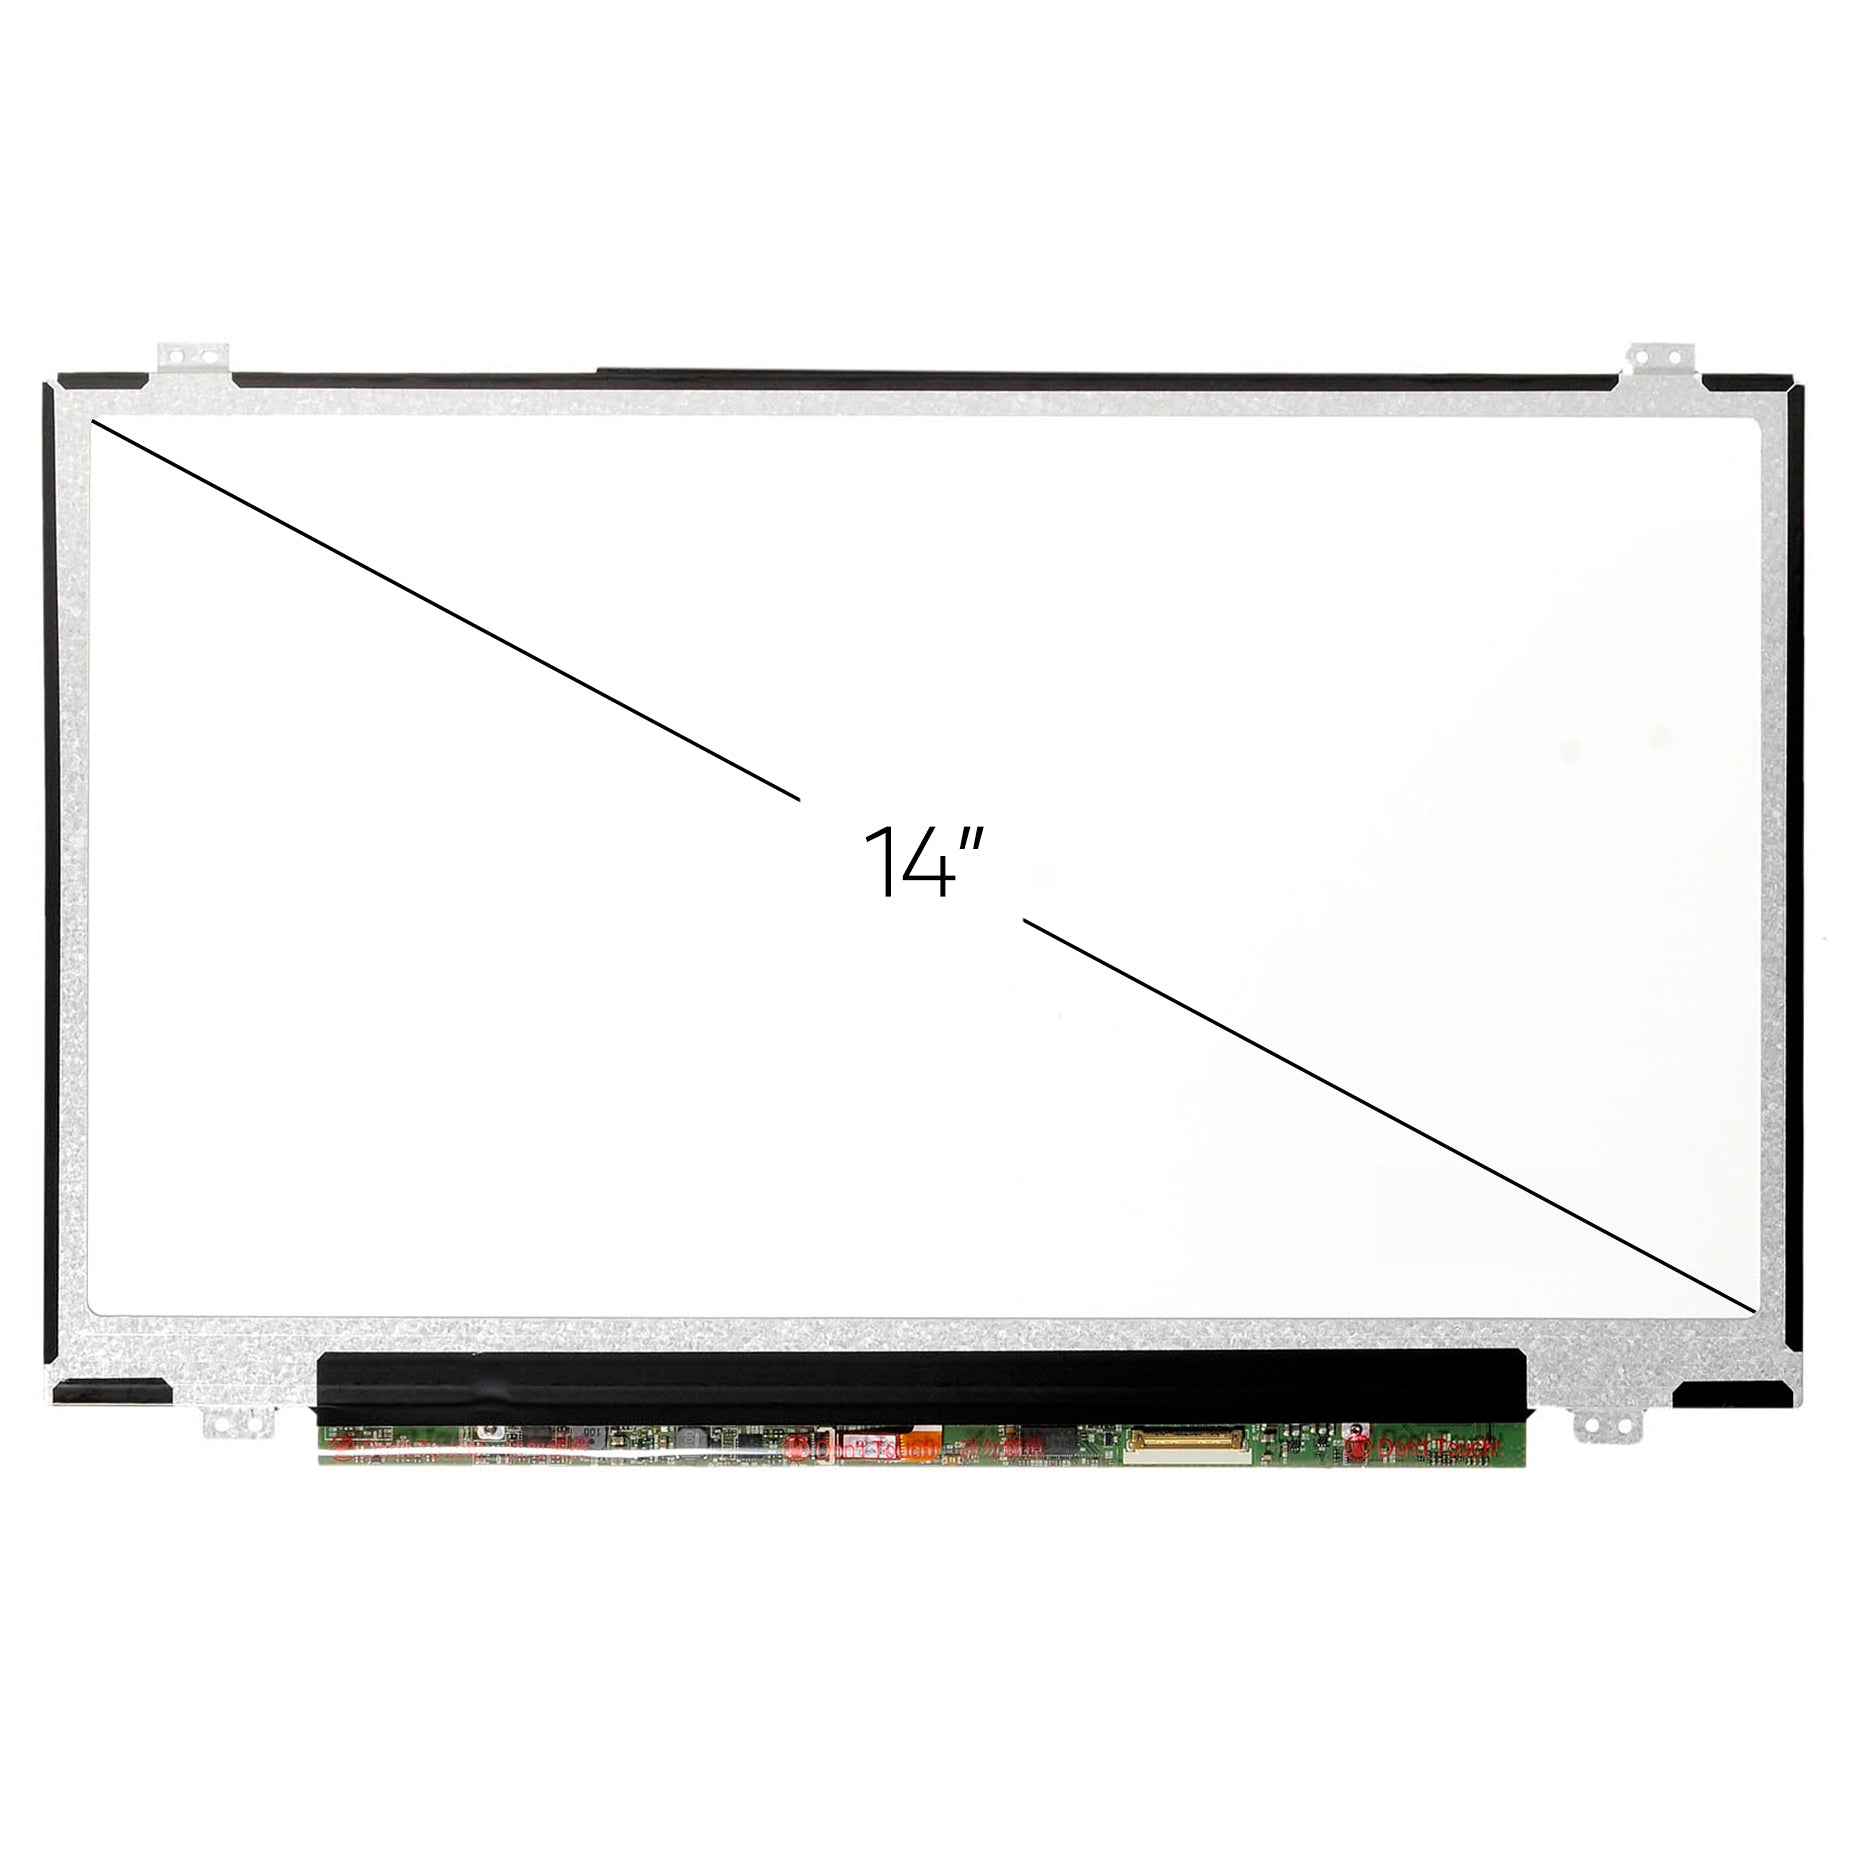 Screen Replacement for Lenovo Ideapad 510S-14IKB FHD 1920x1080 IPS Matte LCD LED Display